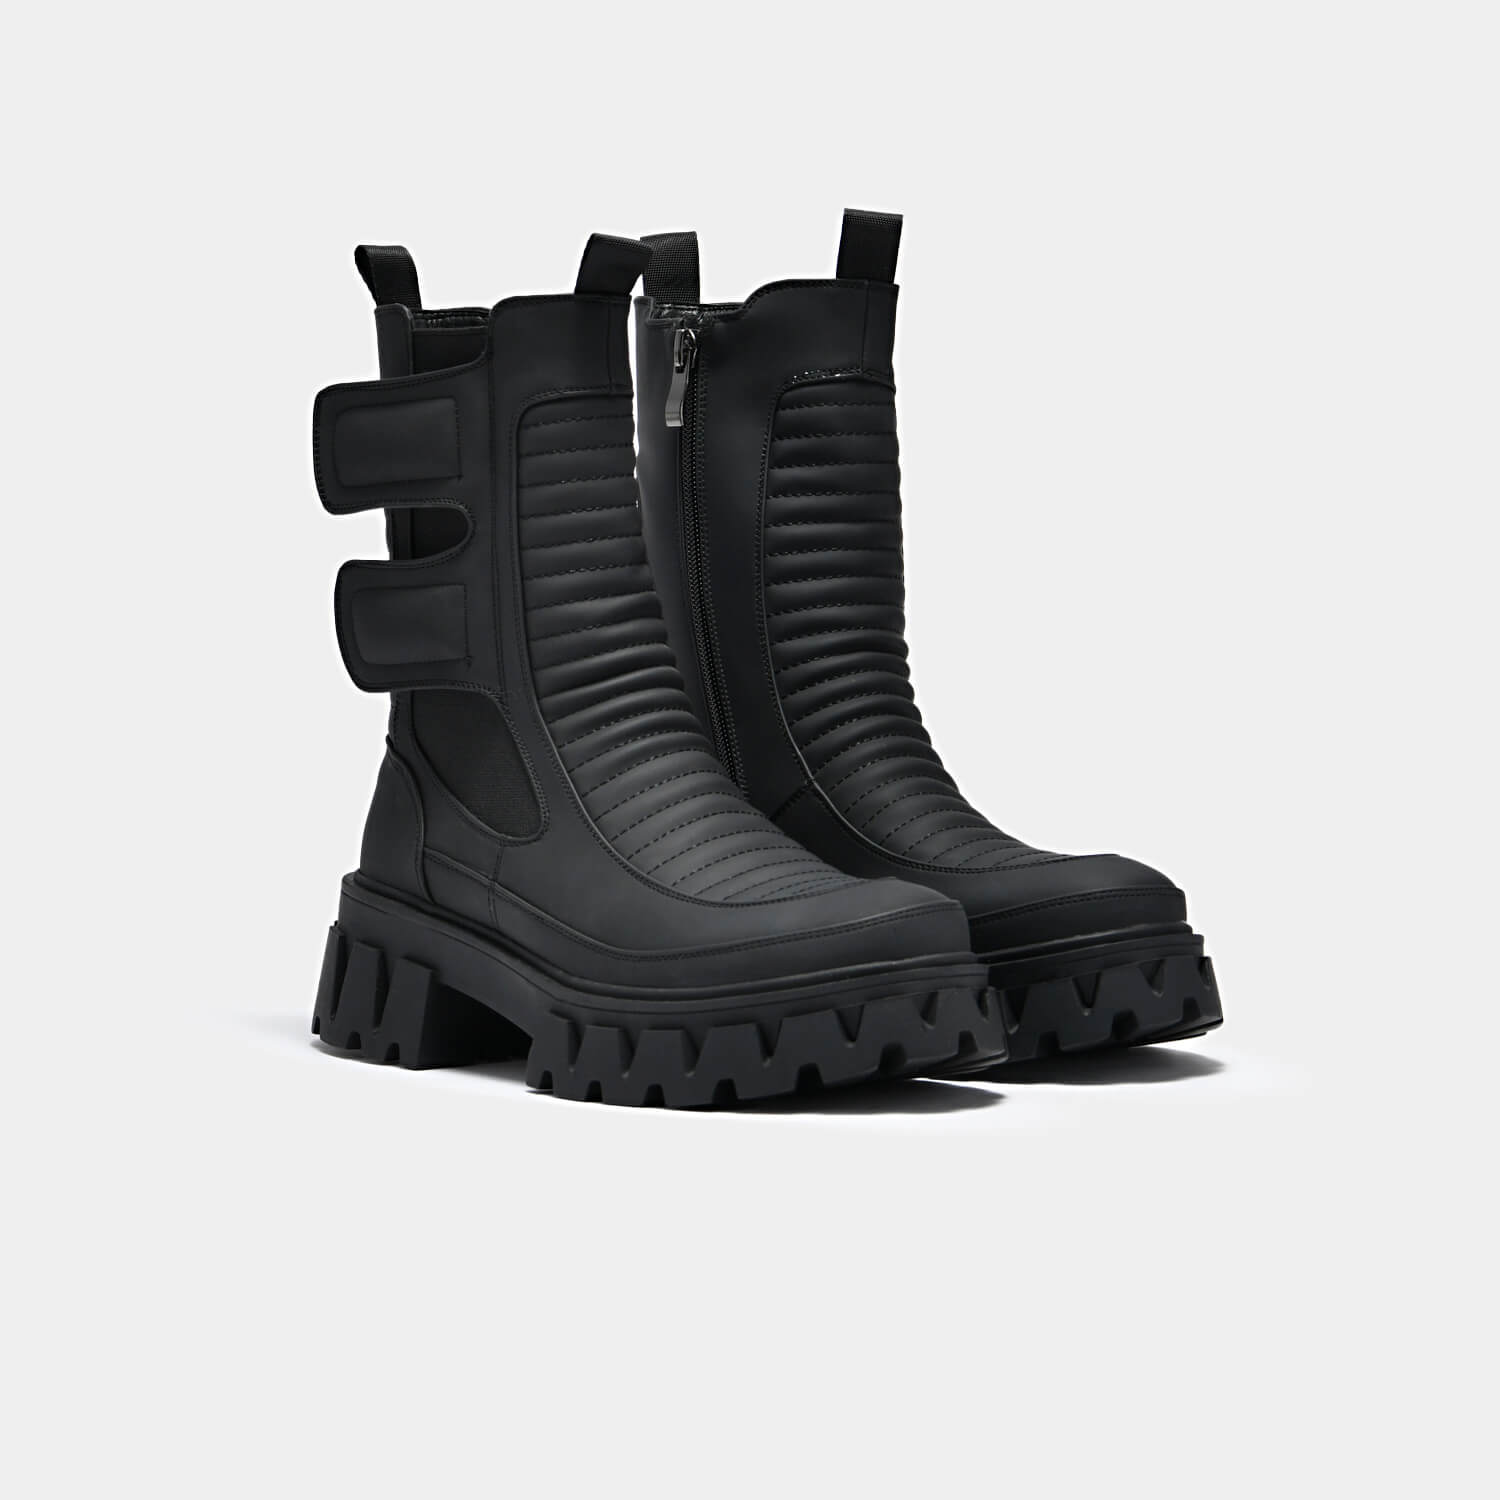 Vader Padded Croft Boots - Ankle Boots - KOI Footwear - Black - Three-Quarter View